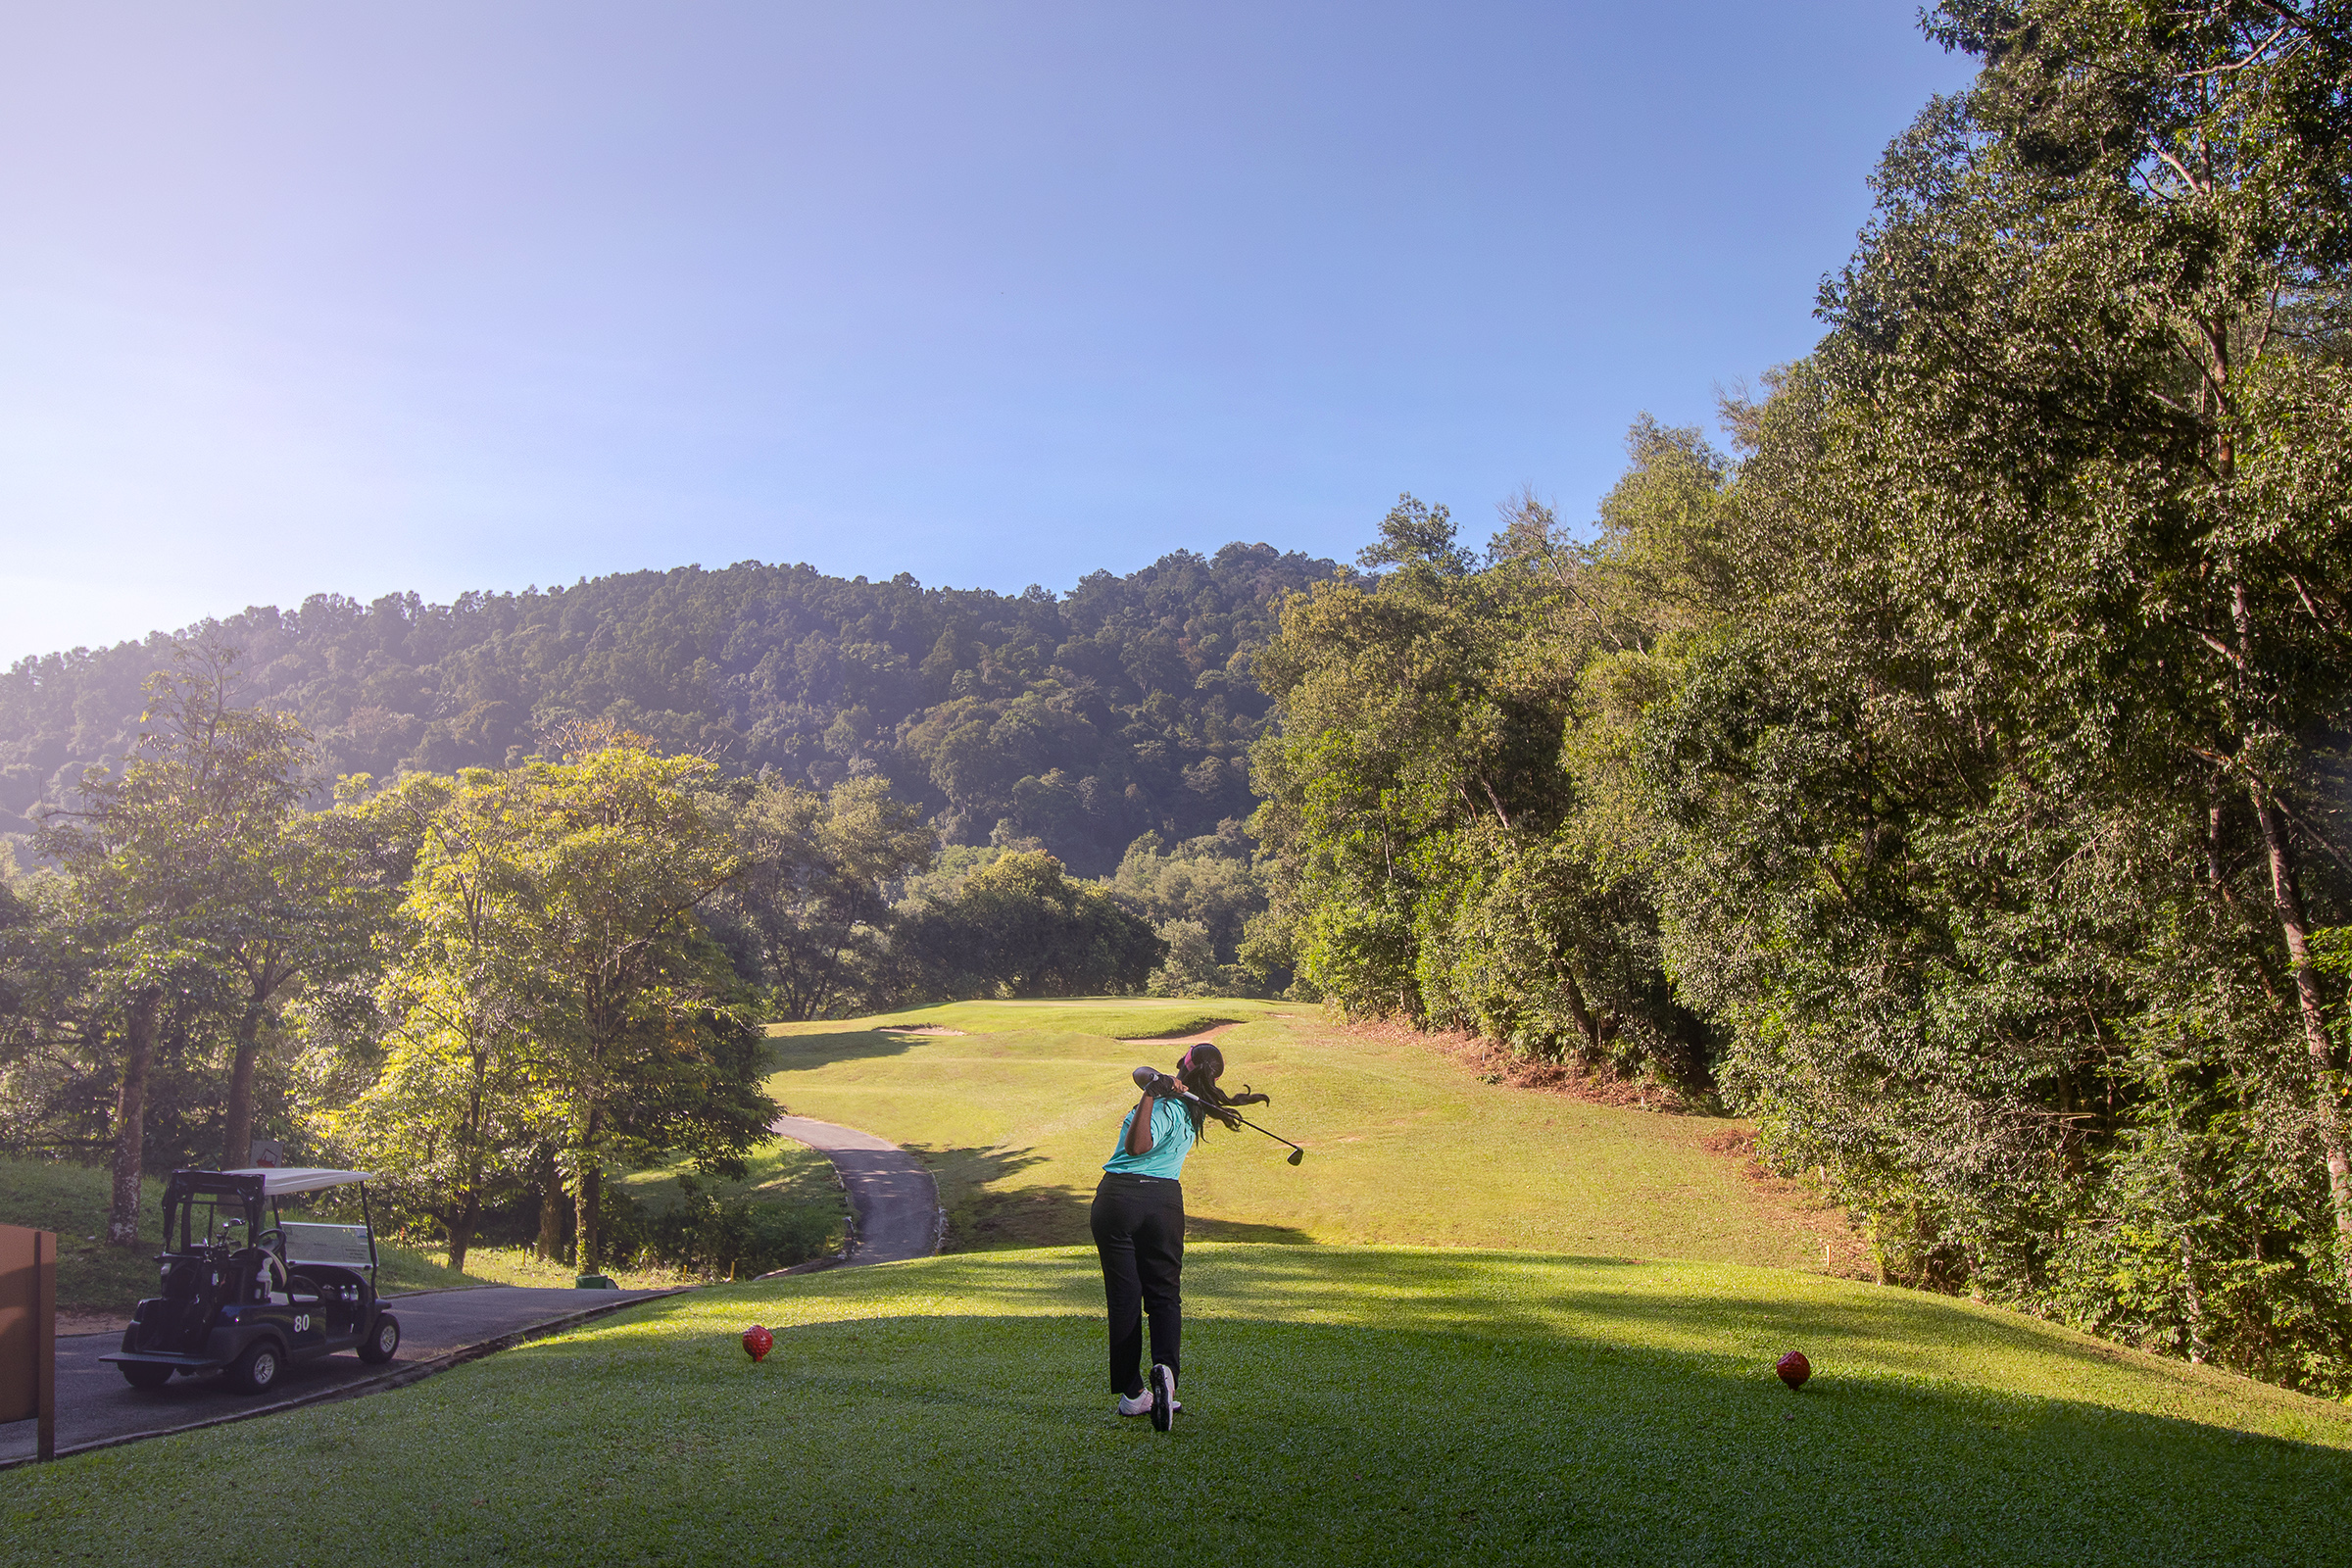 Tee off against the dramatic landscape of the Kledang Saiong Range